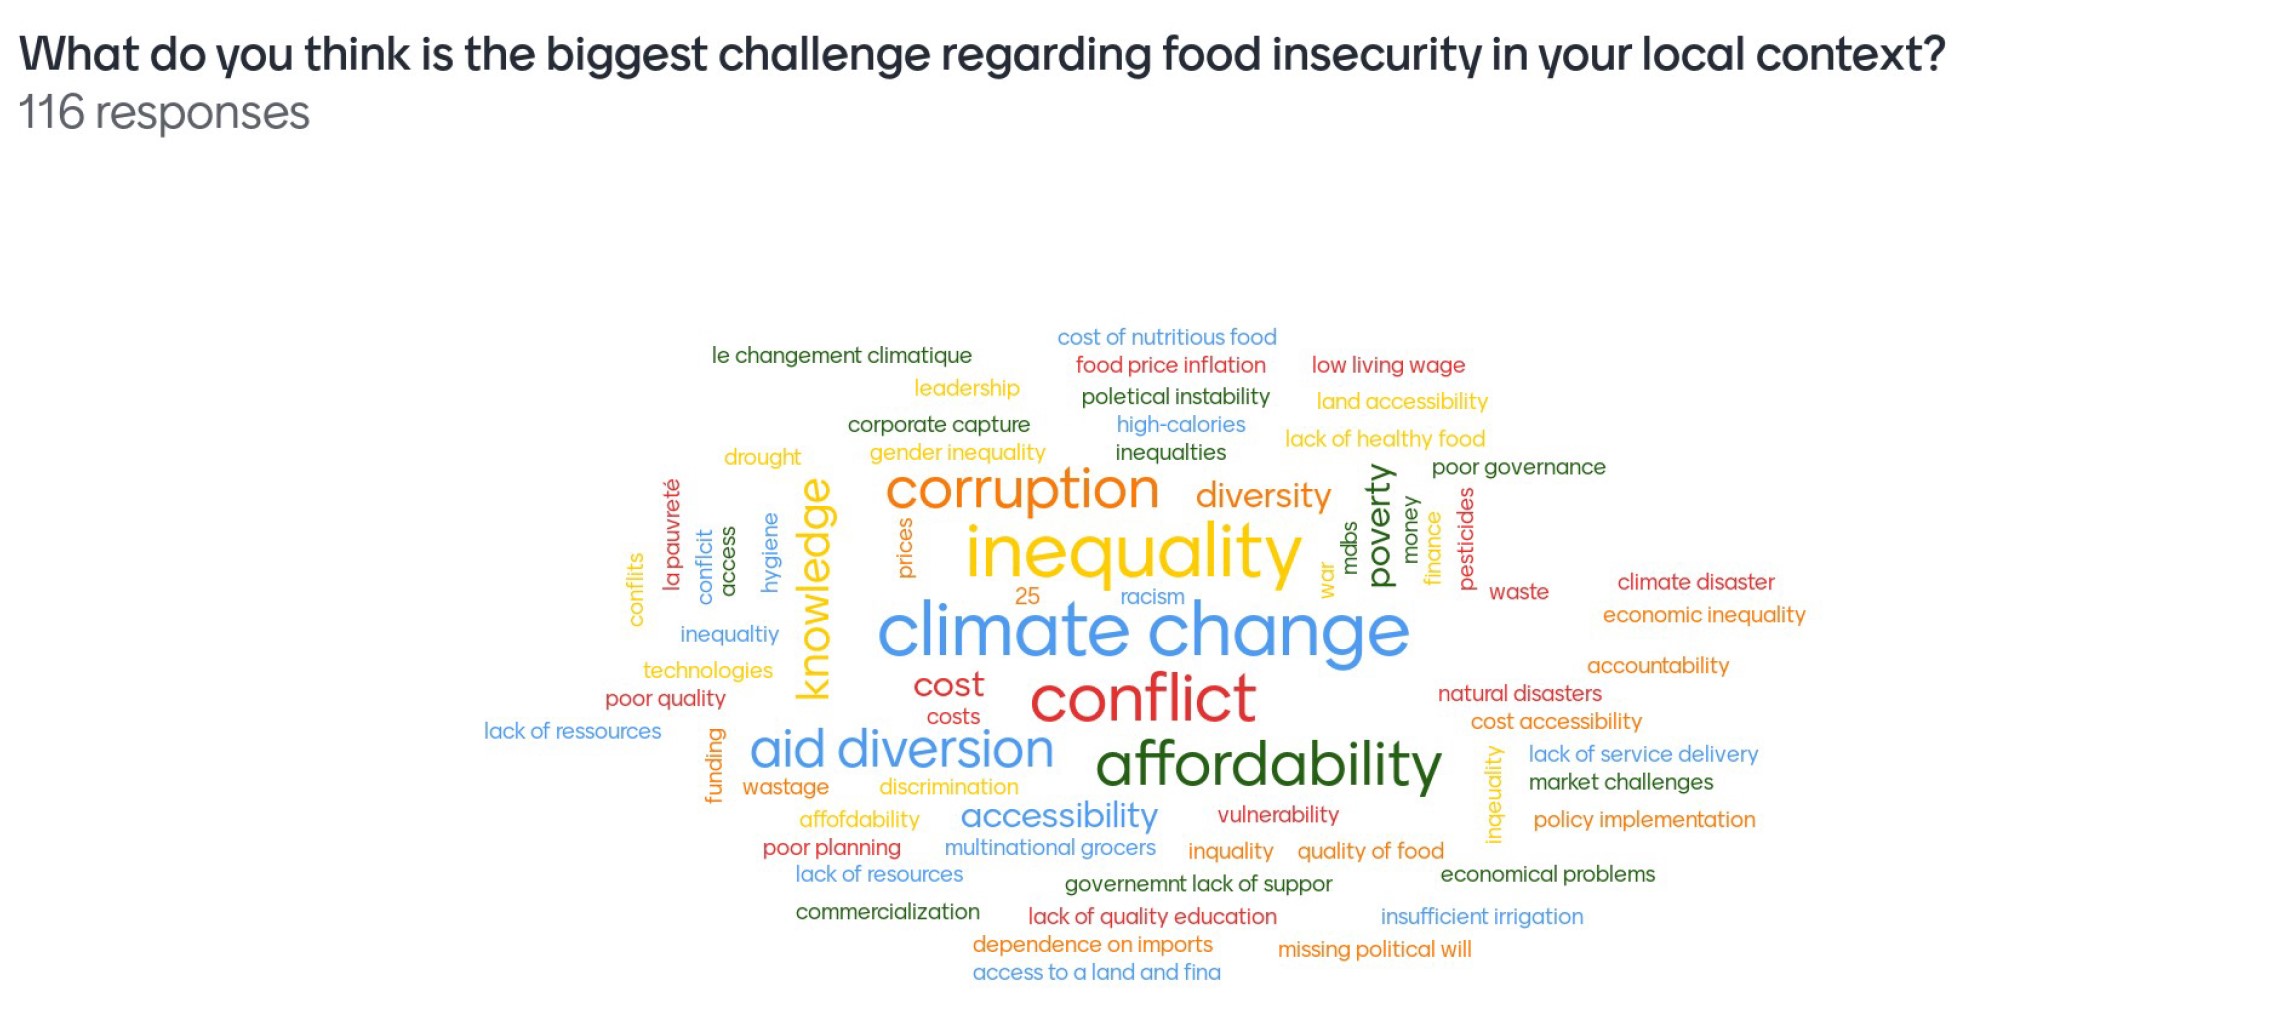 What do you think is the biggest challenge regarding food security in your local context?